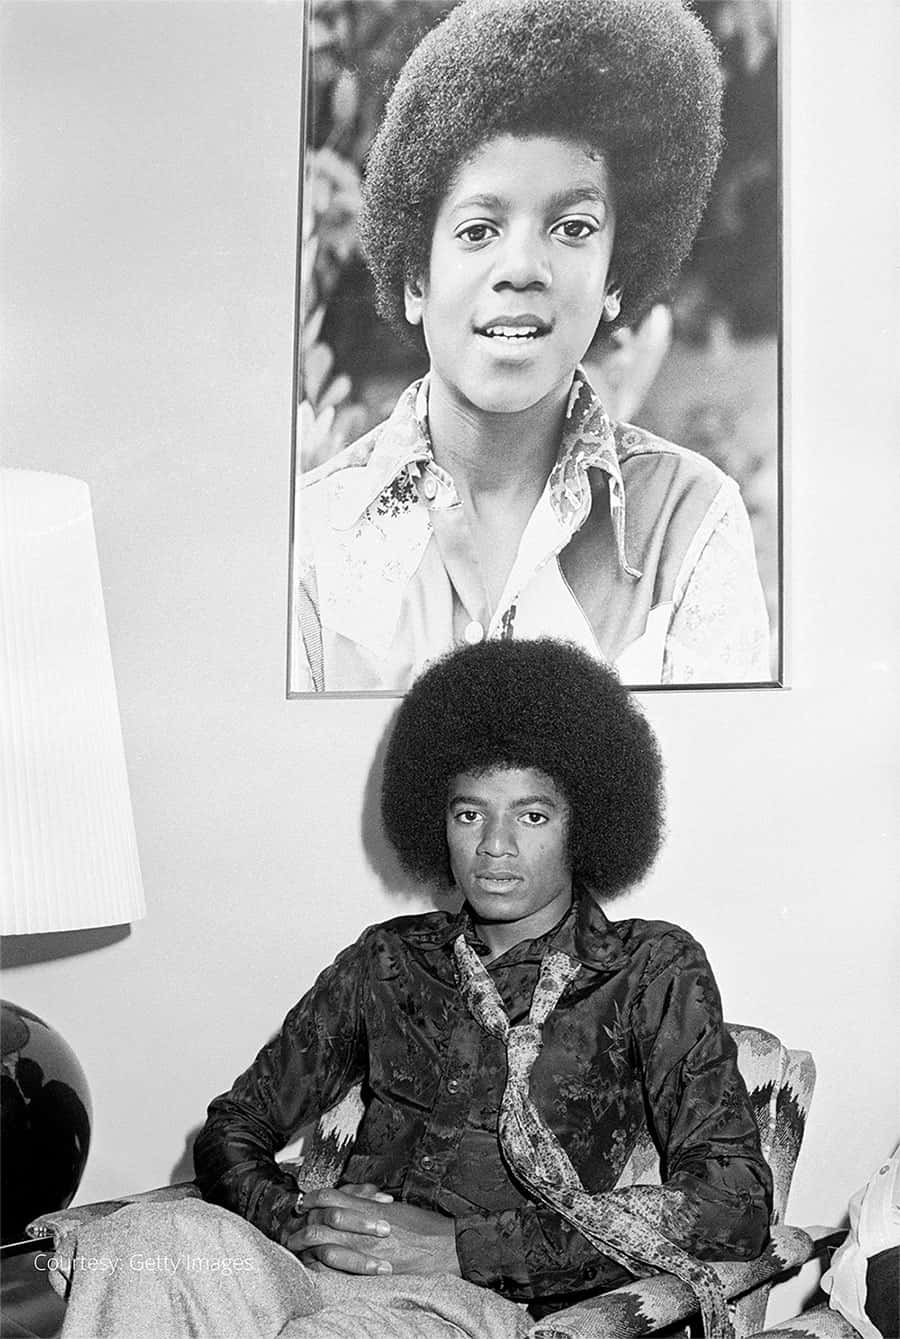 An iconic photo of a young Michael Jackson pop sensation